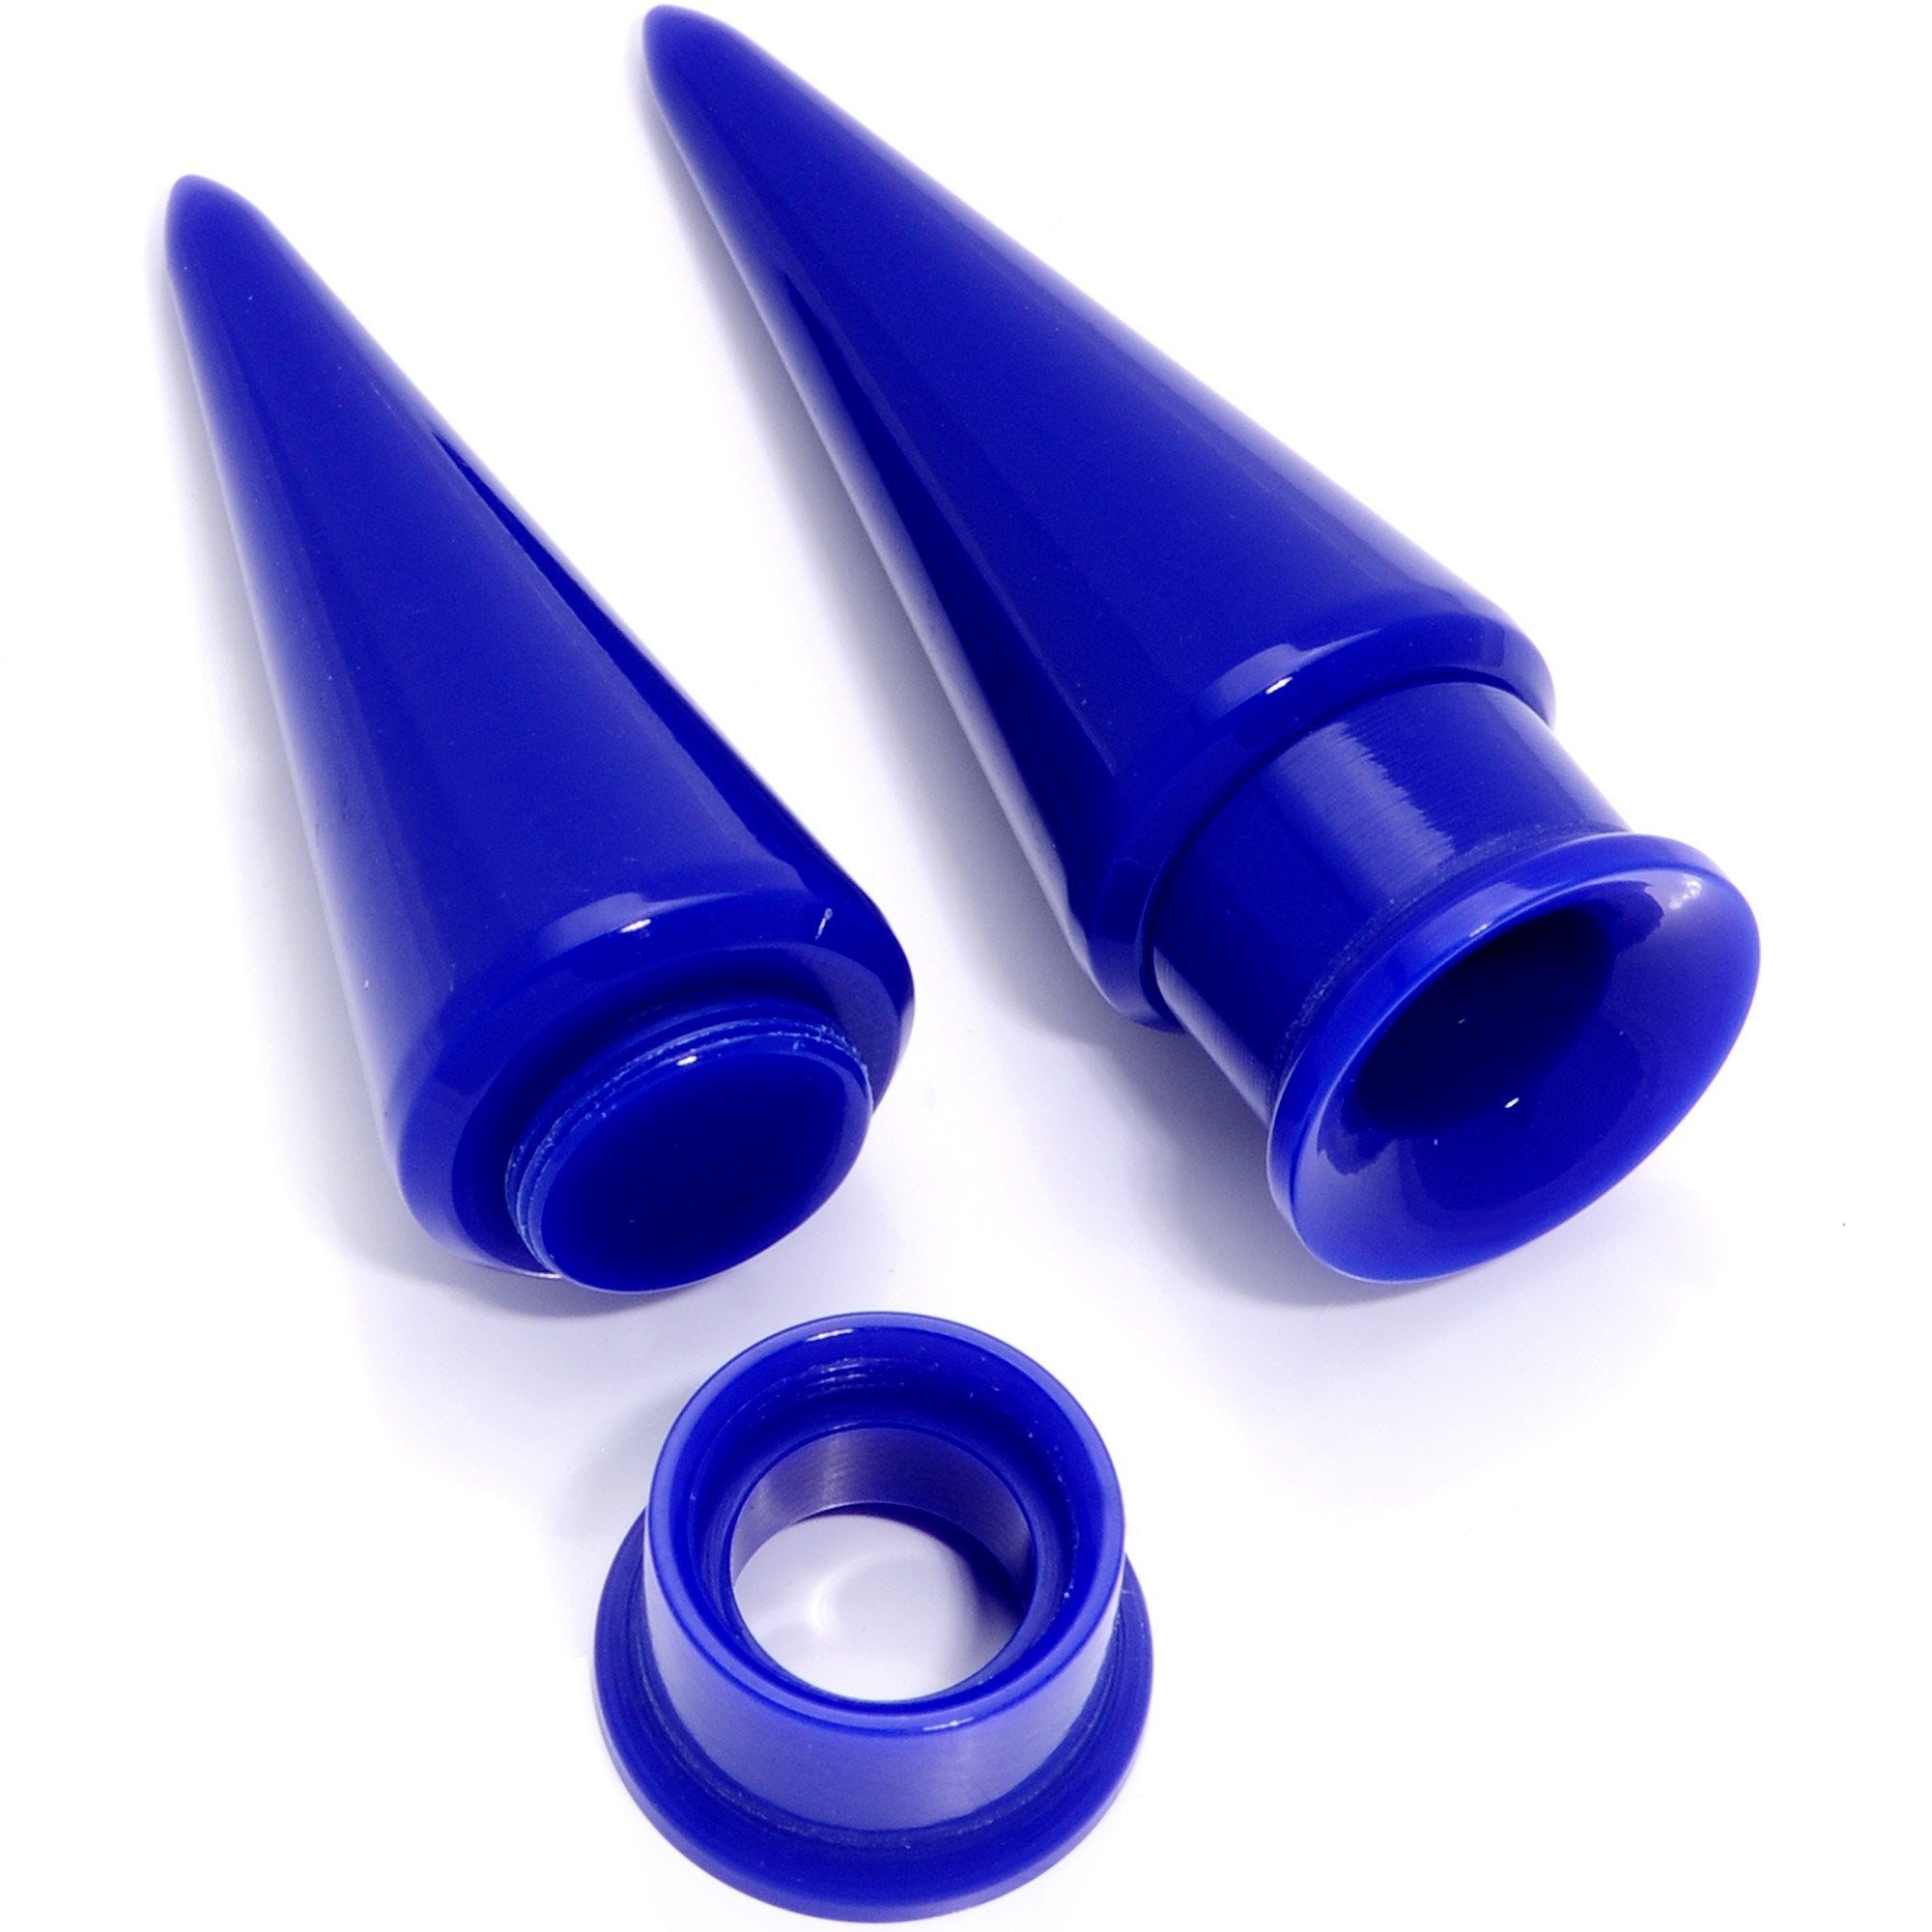 Blue 2 in 1 Interchangeable Screw Fit Plug and Taper Set